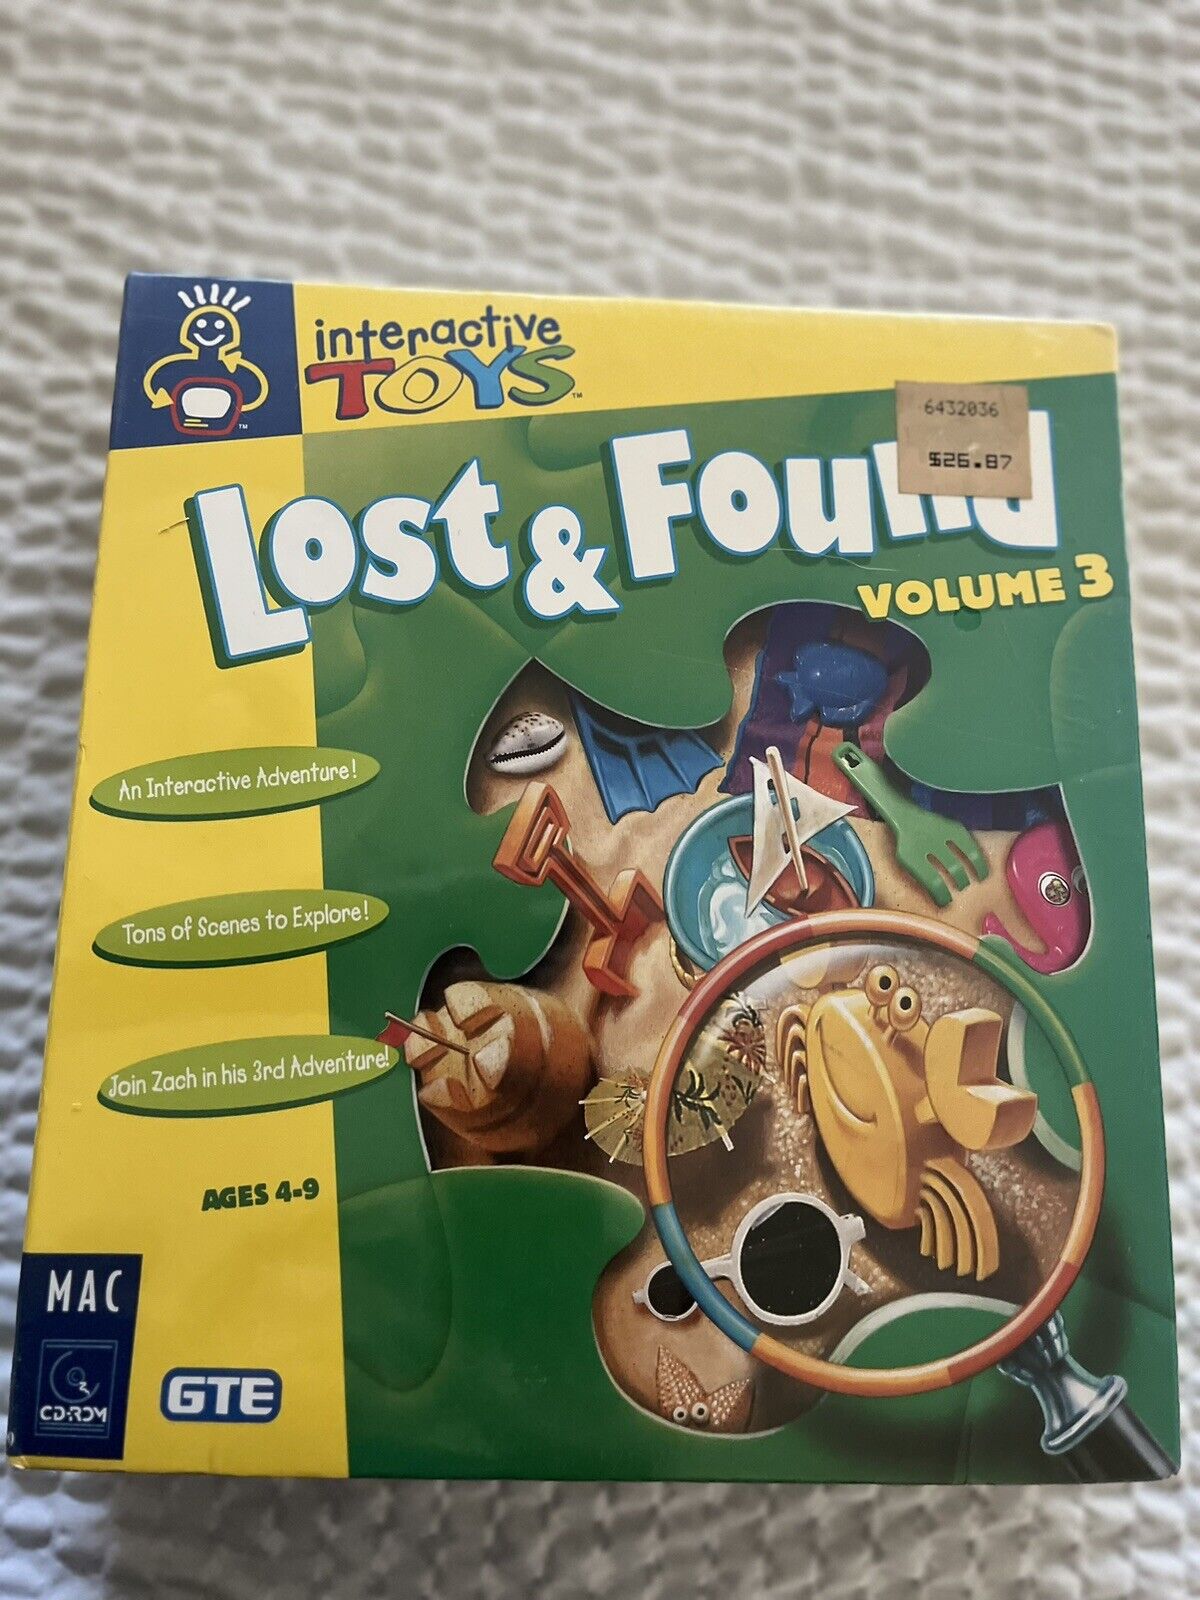 Vintage 1994 GTE Interactive Toys LOST & FOUND CD-Rom Volume 3 NEW SEALED